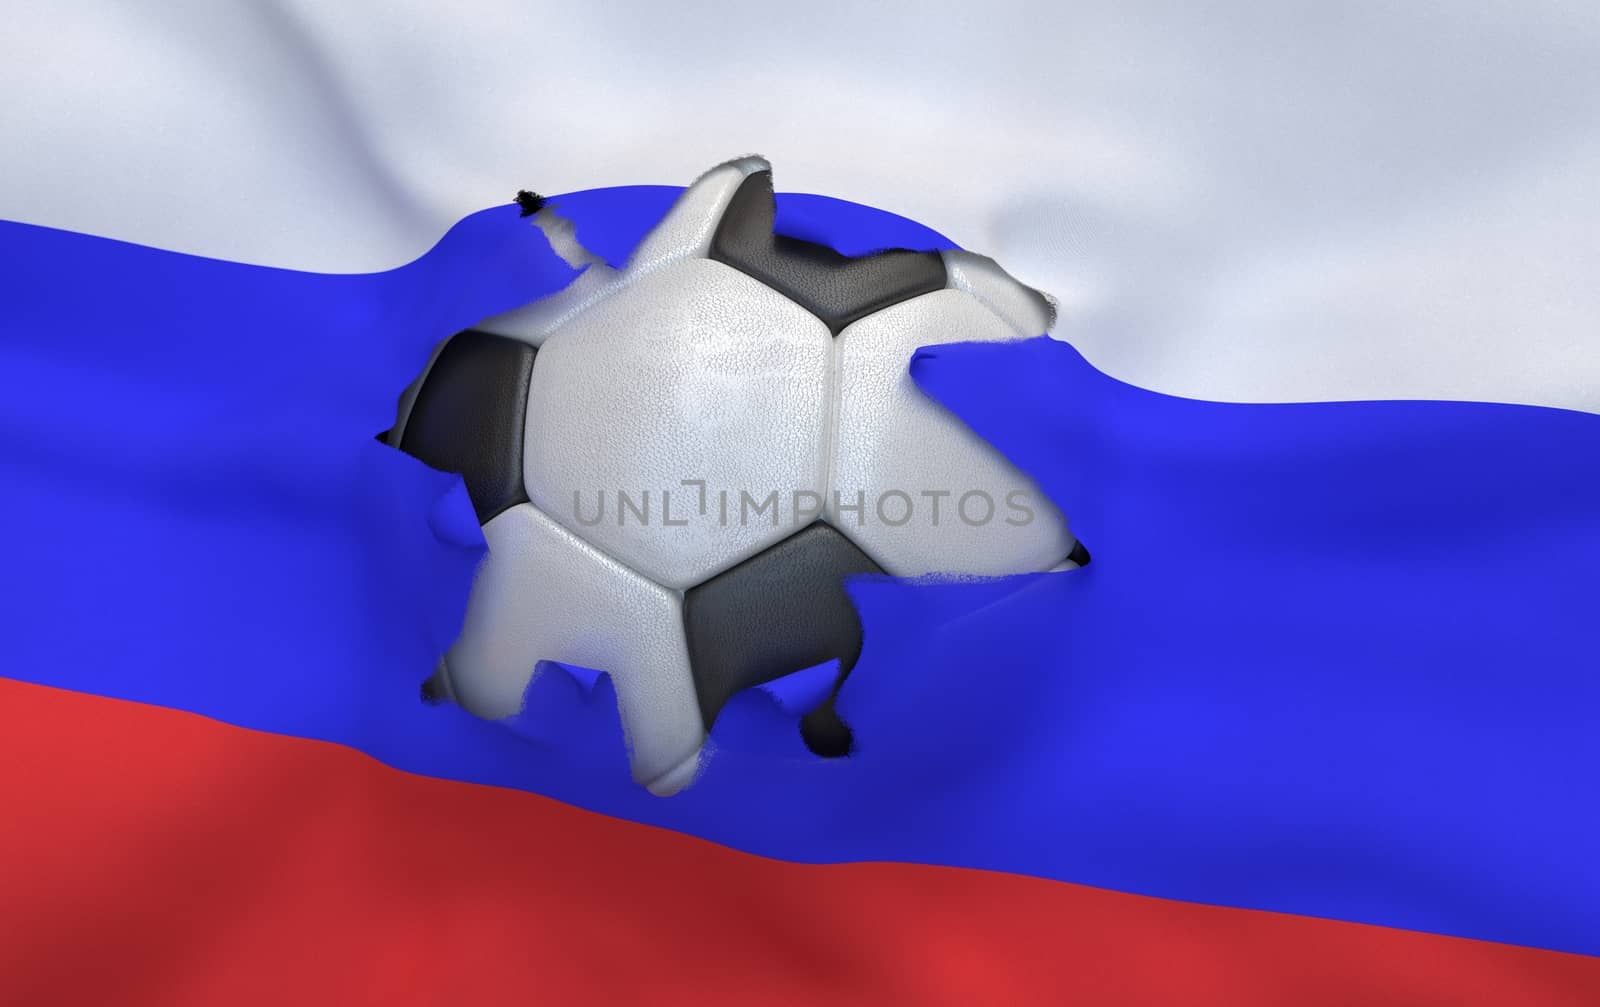 The hole in the flag of Russia and soccer ball by Barbraford